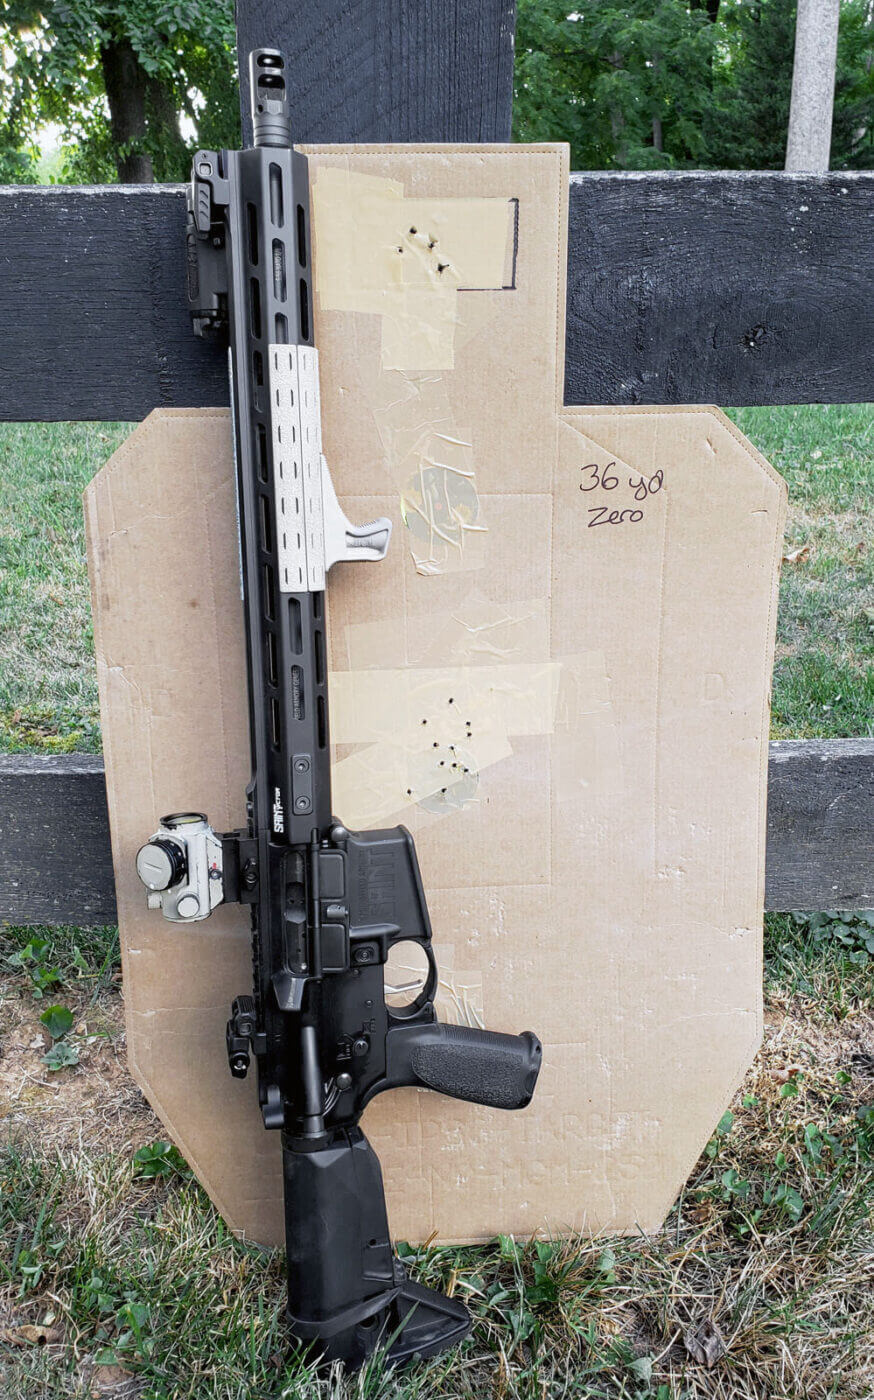 For a combat marksman, this gun is shown sighted in at 36yd. The picture shows how the author, Ian Kenney, was able to put projectiles into center of mass with relative ease. The barrel combined with the recoil operates well in this caliber to punch holes in paper or when hunting. It works well regardless of the rifle or brand: Trijicon, EOTech, Hornady, etc.